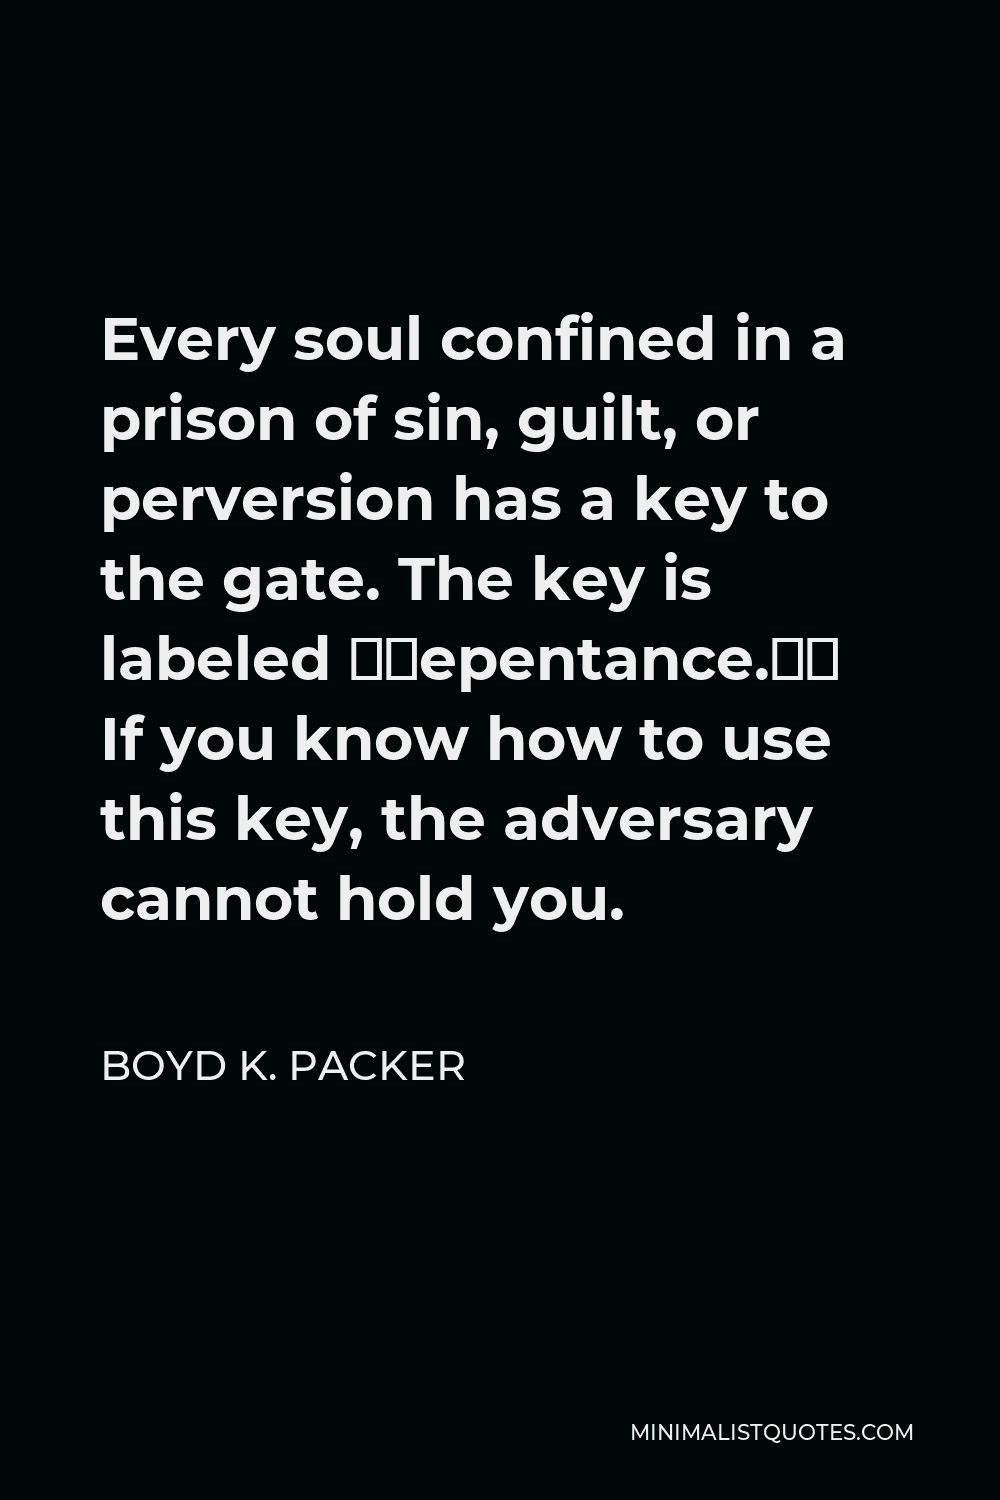 Boyd K. Packer Quote - Every soul confined in a prison of sin, guilt, or perversion has a key to the gate. The key is labeled “repentance.” If you know how to use this key, the adversary cannot hold you.